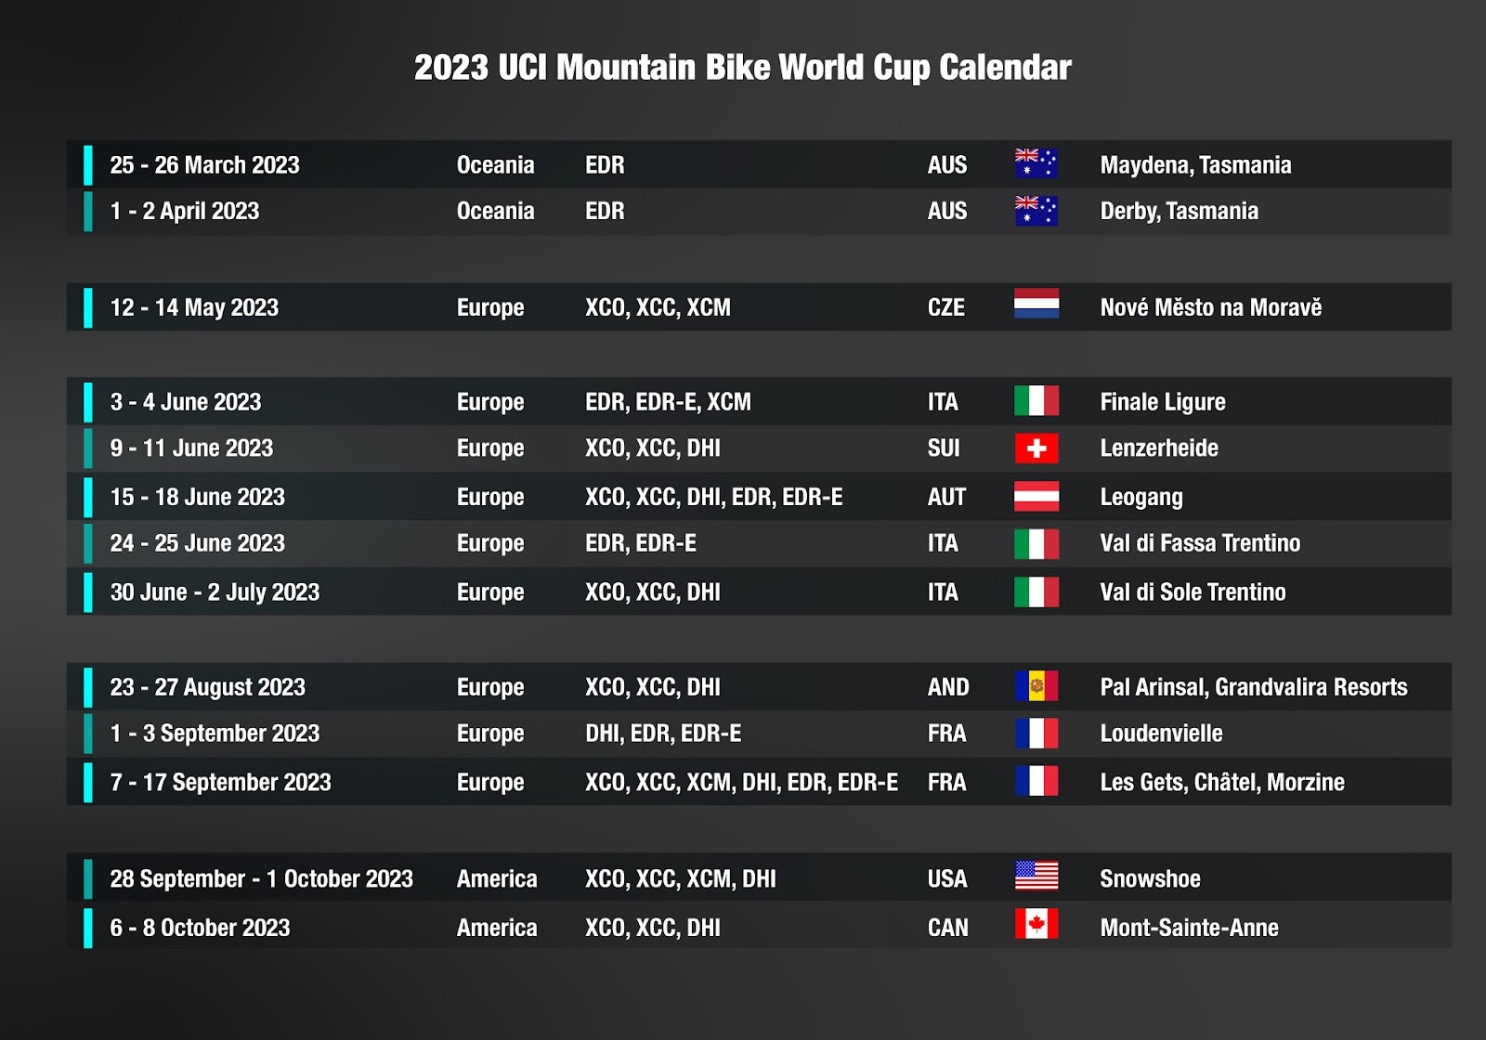 mtb-calendar-2023-dates-and-venues-for-uci-world-cup-and-world